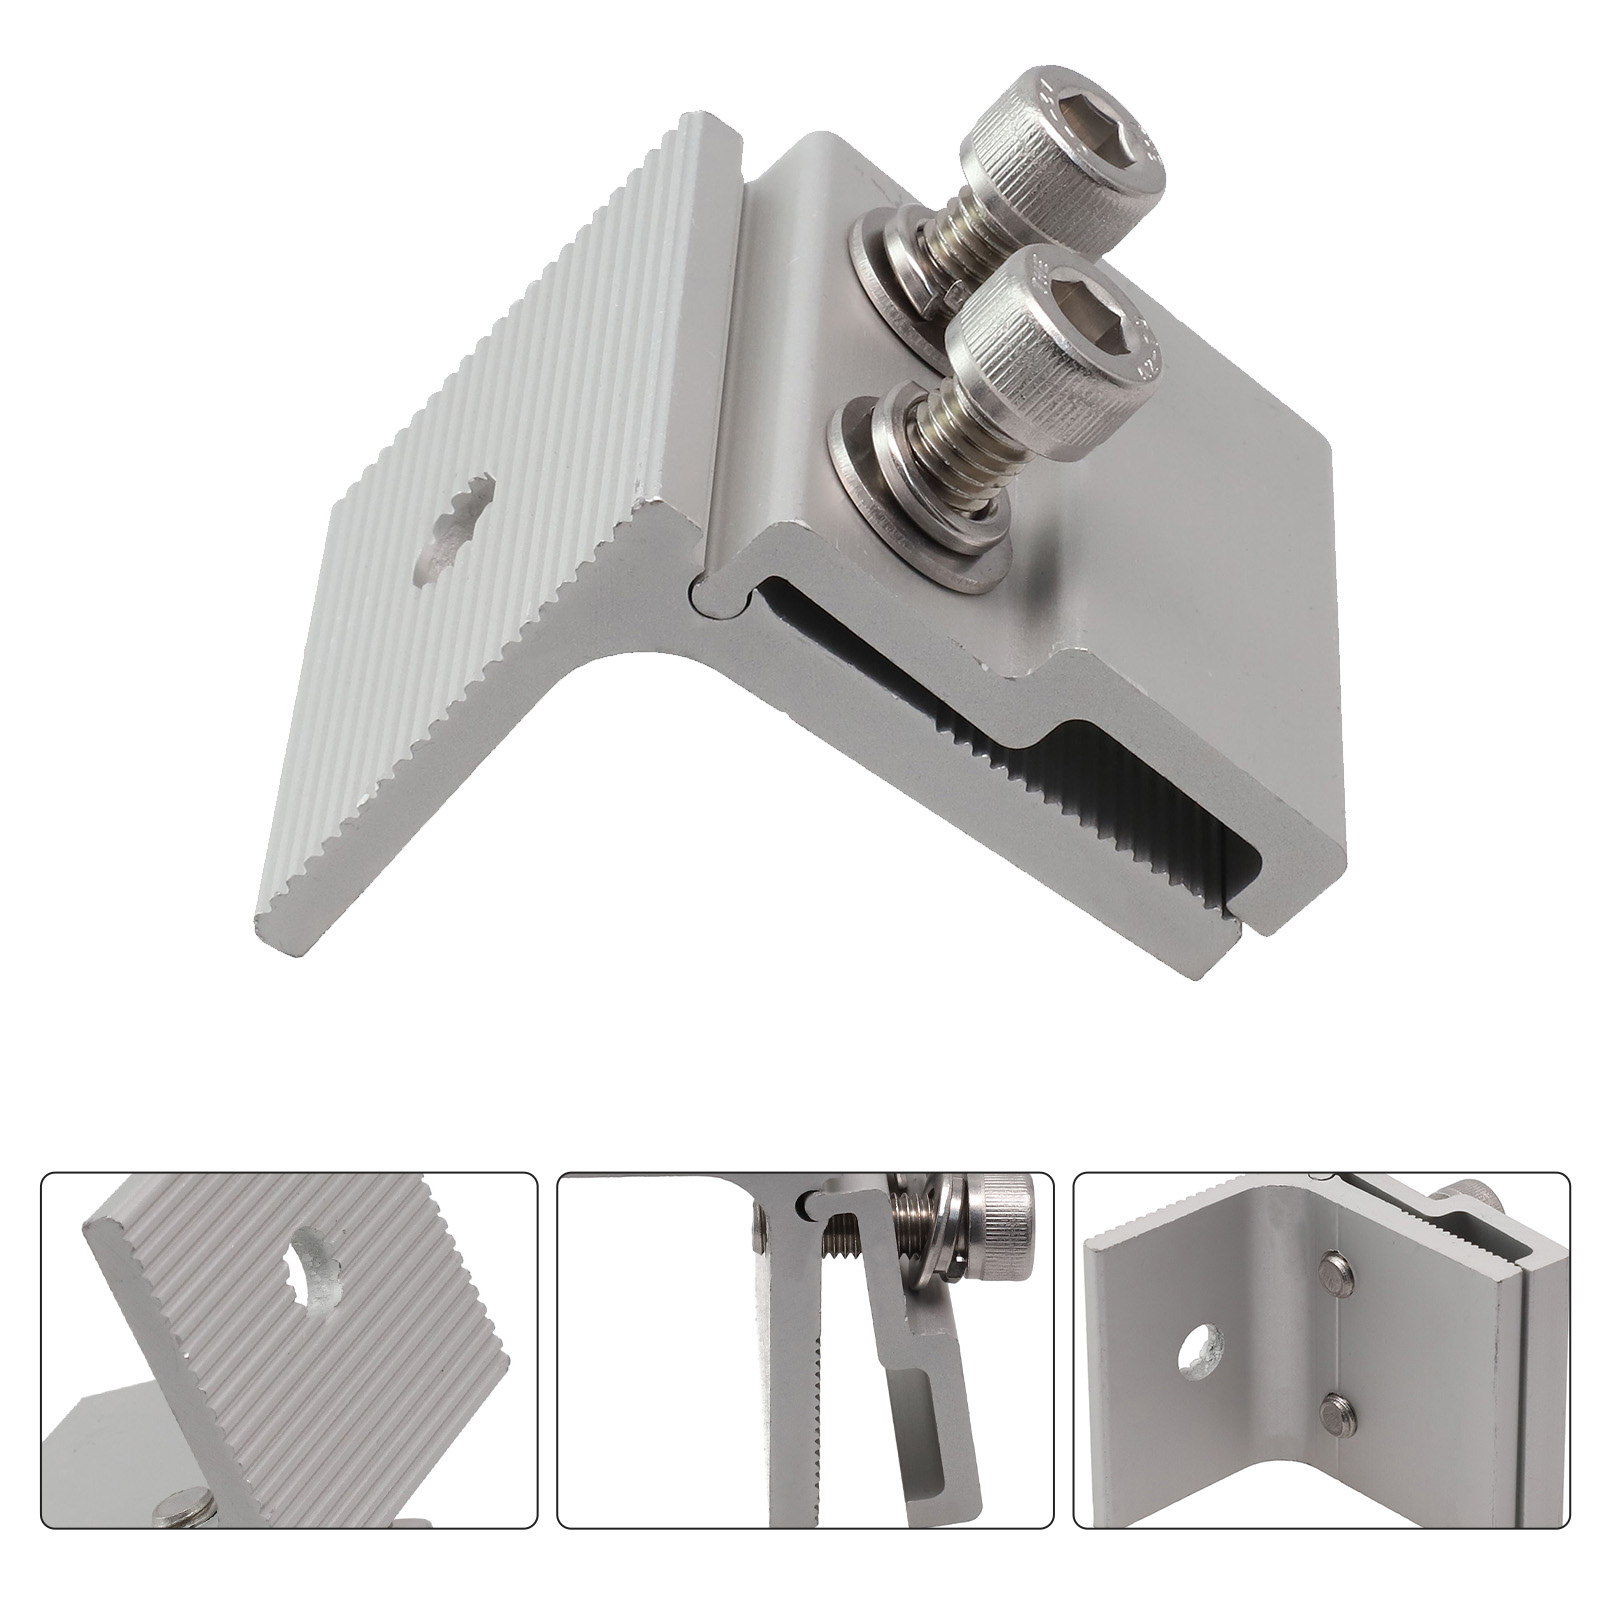 1/Solar Panel Bracket Photovoltaic PV Panel Roof Standing Seam Clamp Solar Power System Mounting Fixing Clamps